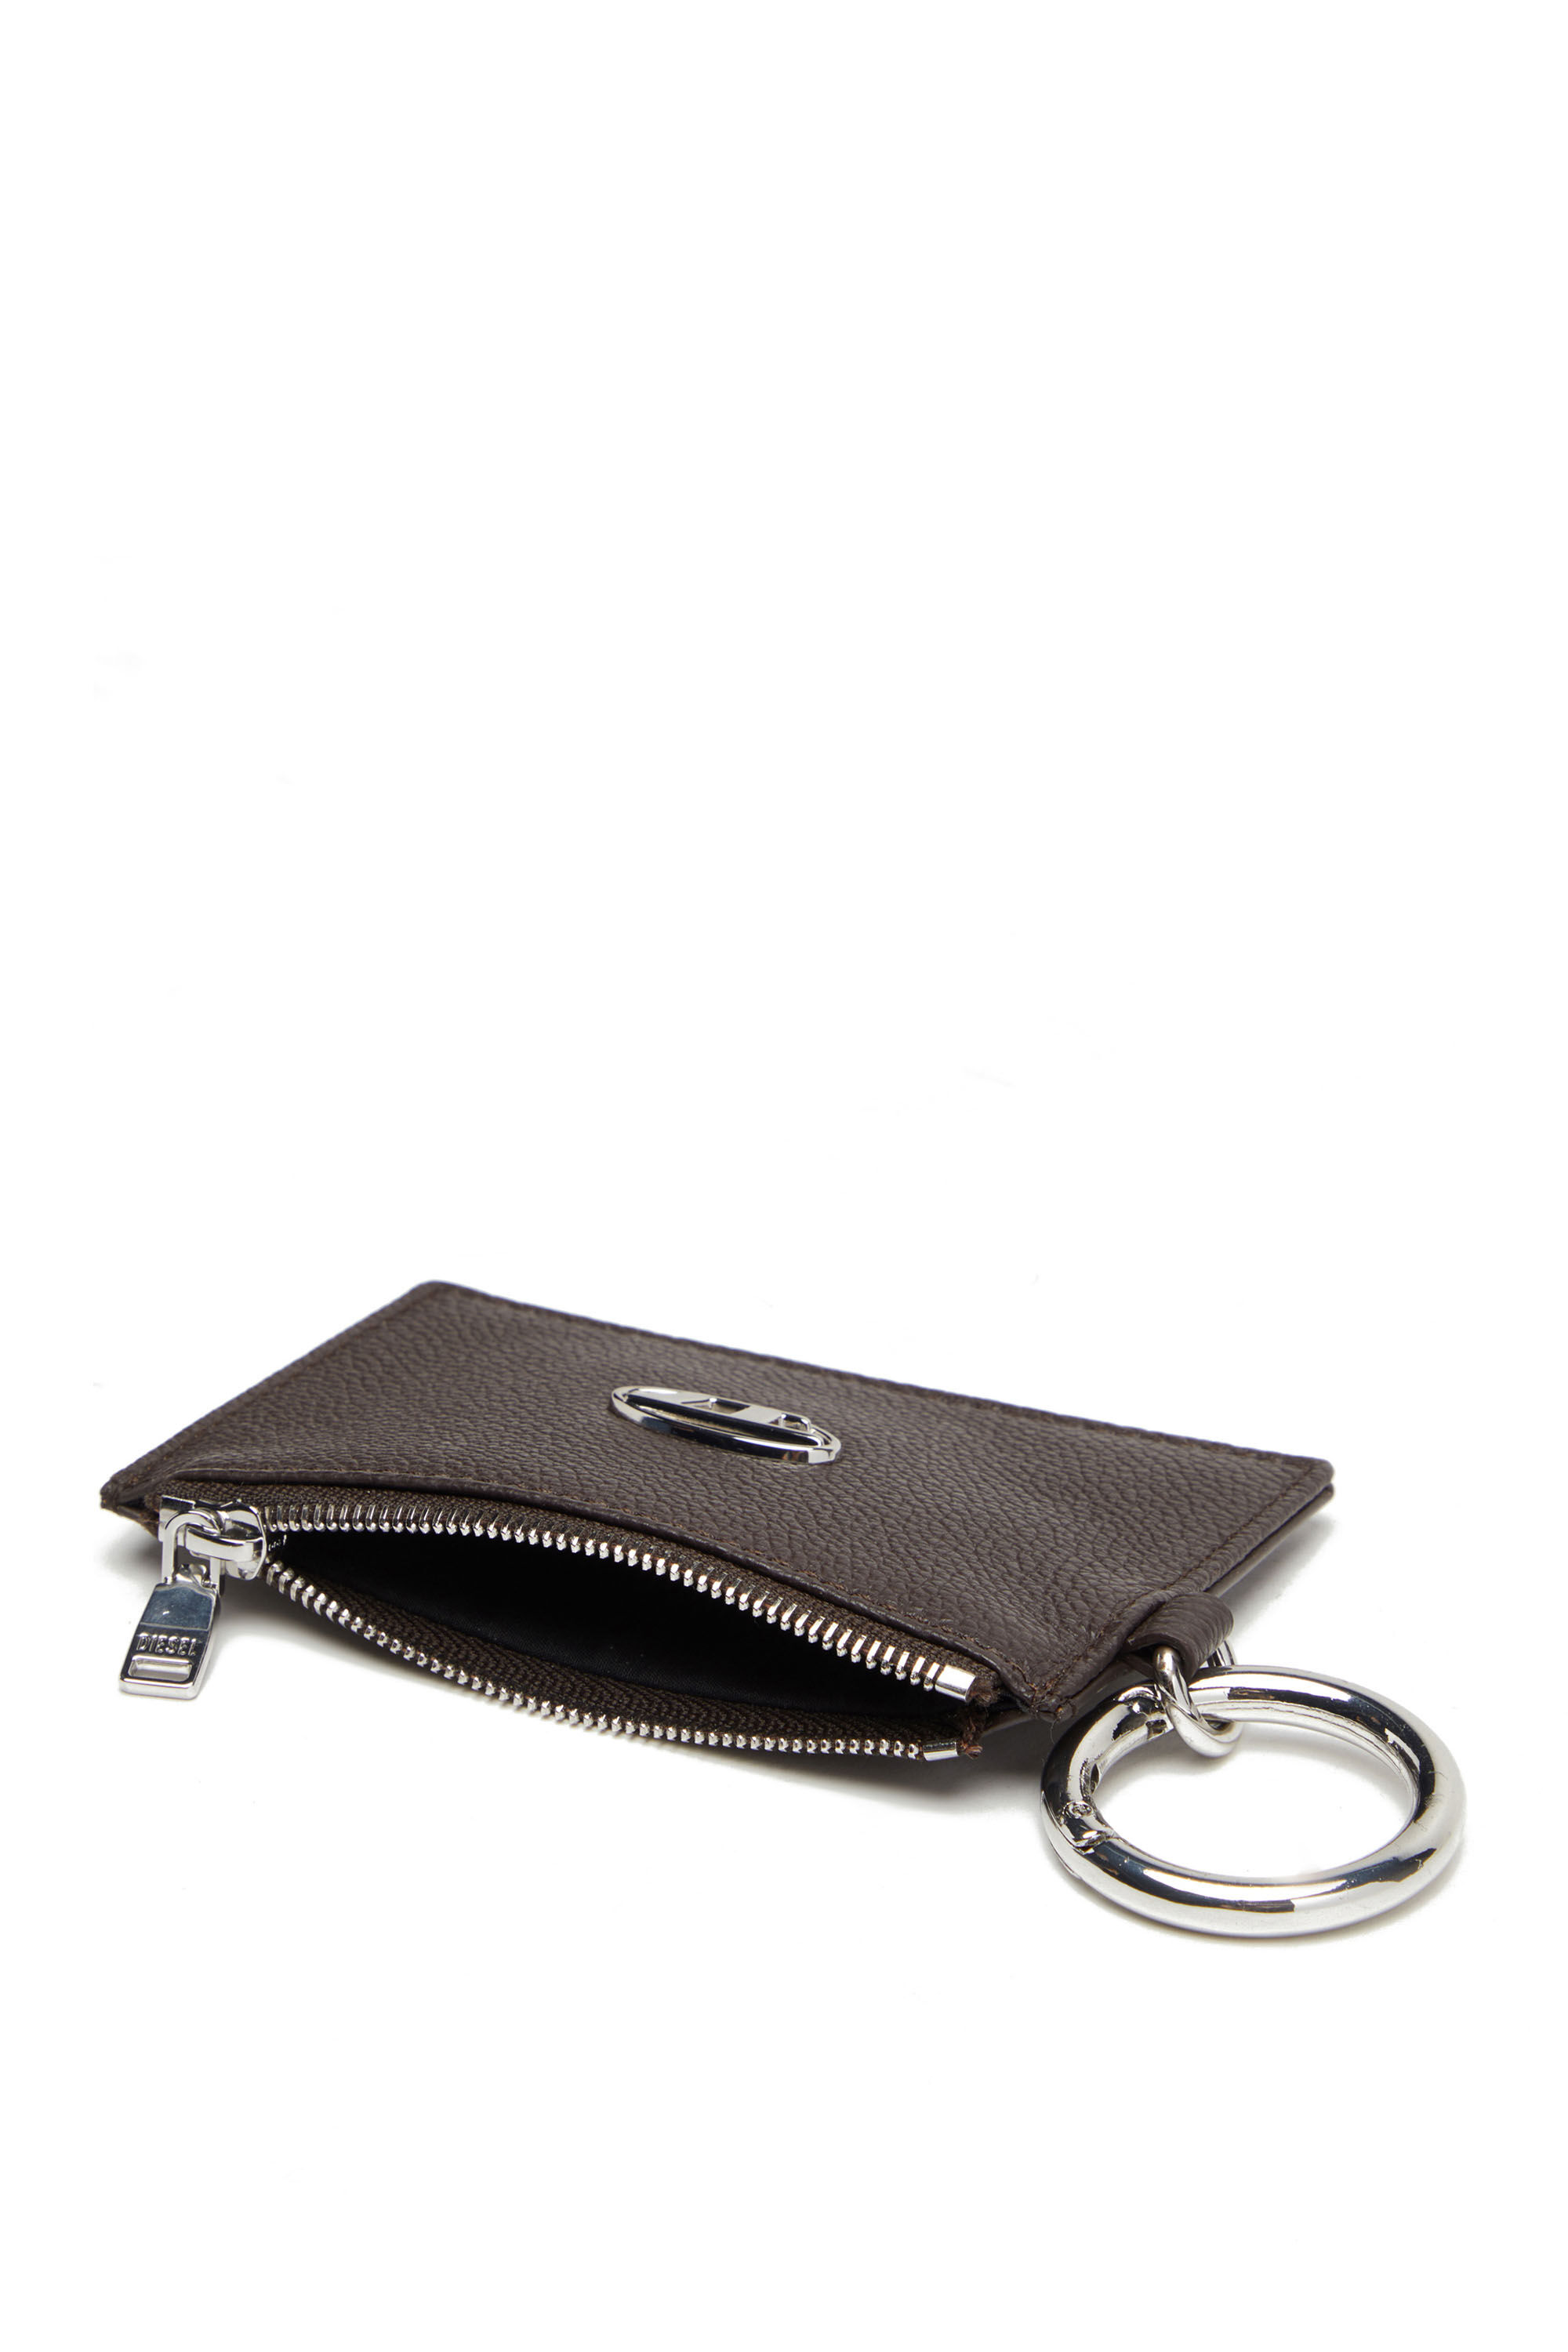 Diesel - CARD POUCH, Unisex Slim leather coin and card holder in Brown - Image 3